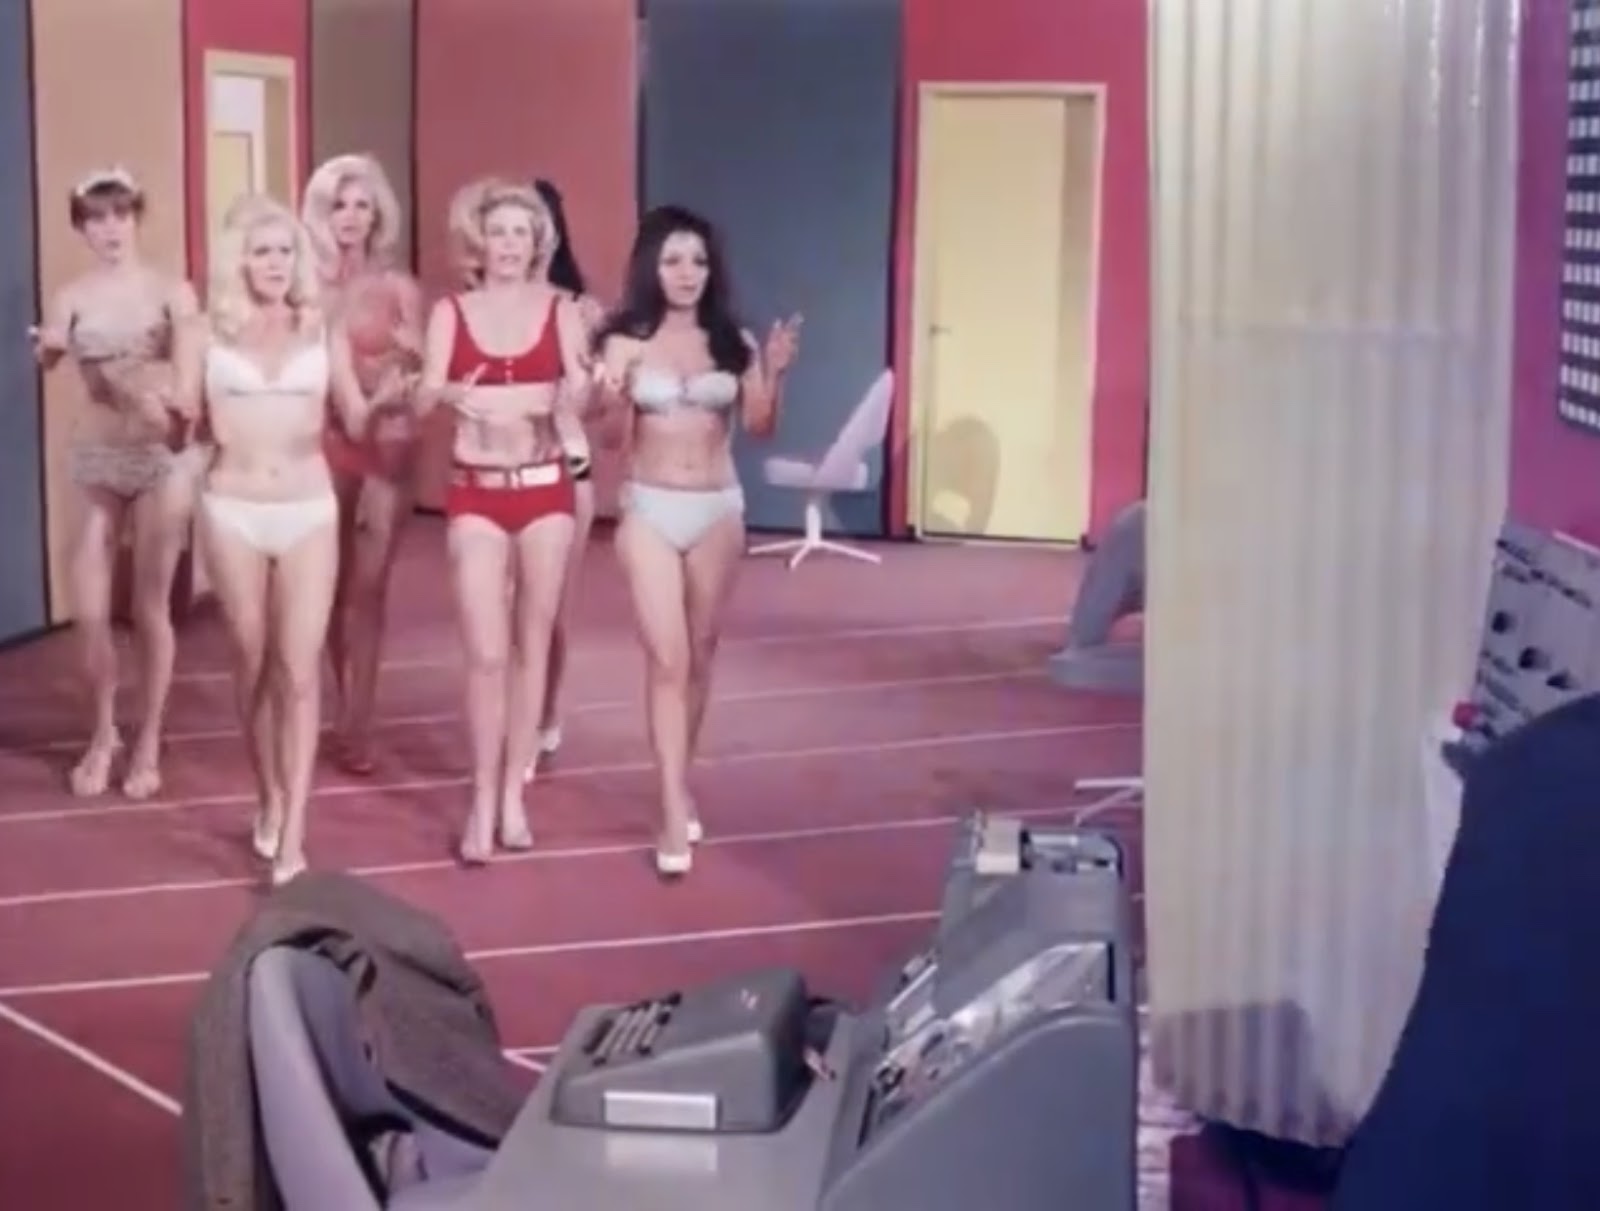 A still from How to Make a Doll. Six fembots wearing underwear walk in a brightly colored room.